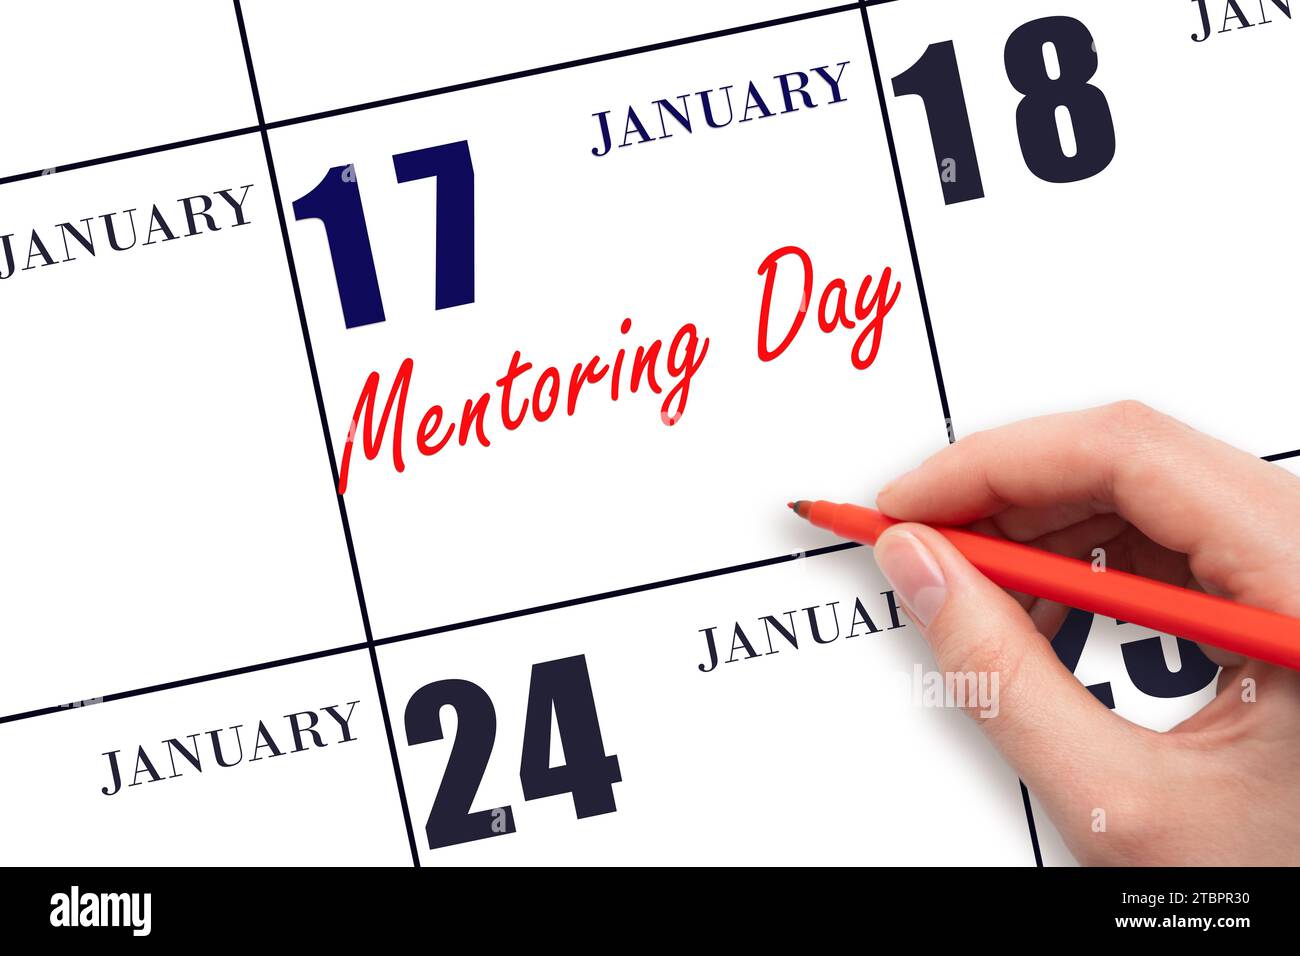 January 17. Hand writing text Mentoring Day on calendar date. Save the date. Holiday.  Day of the year concept. Stock Photo